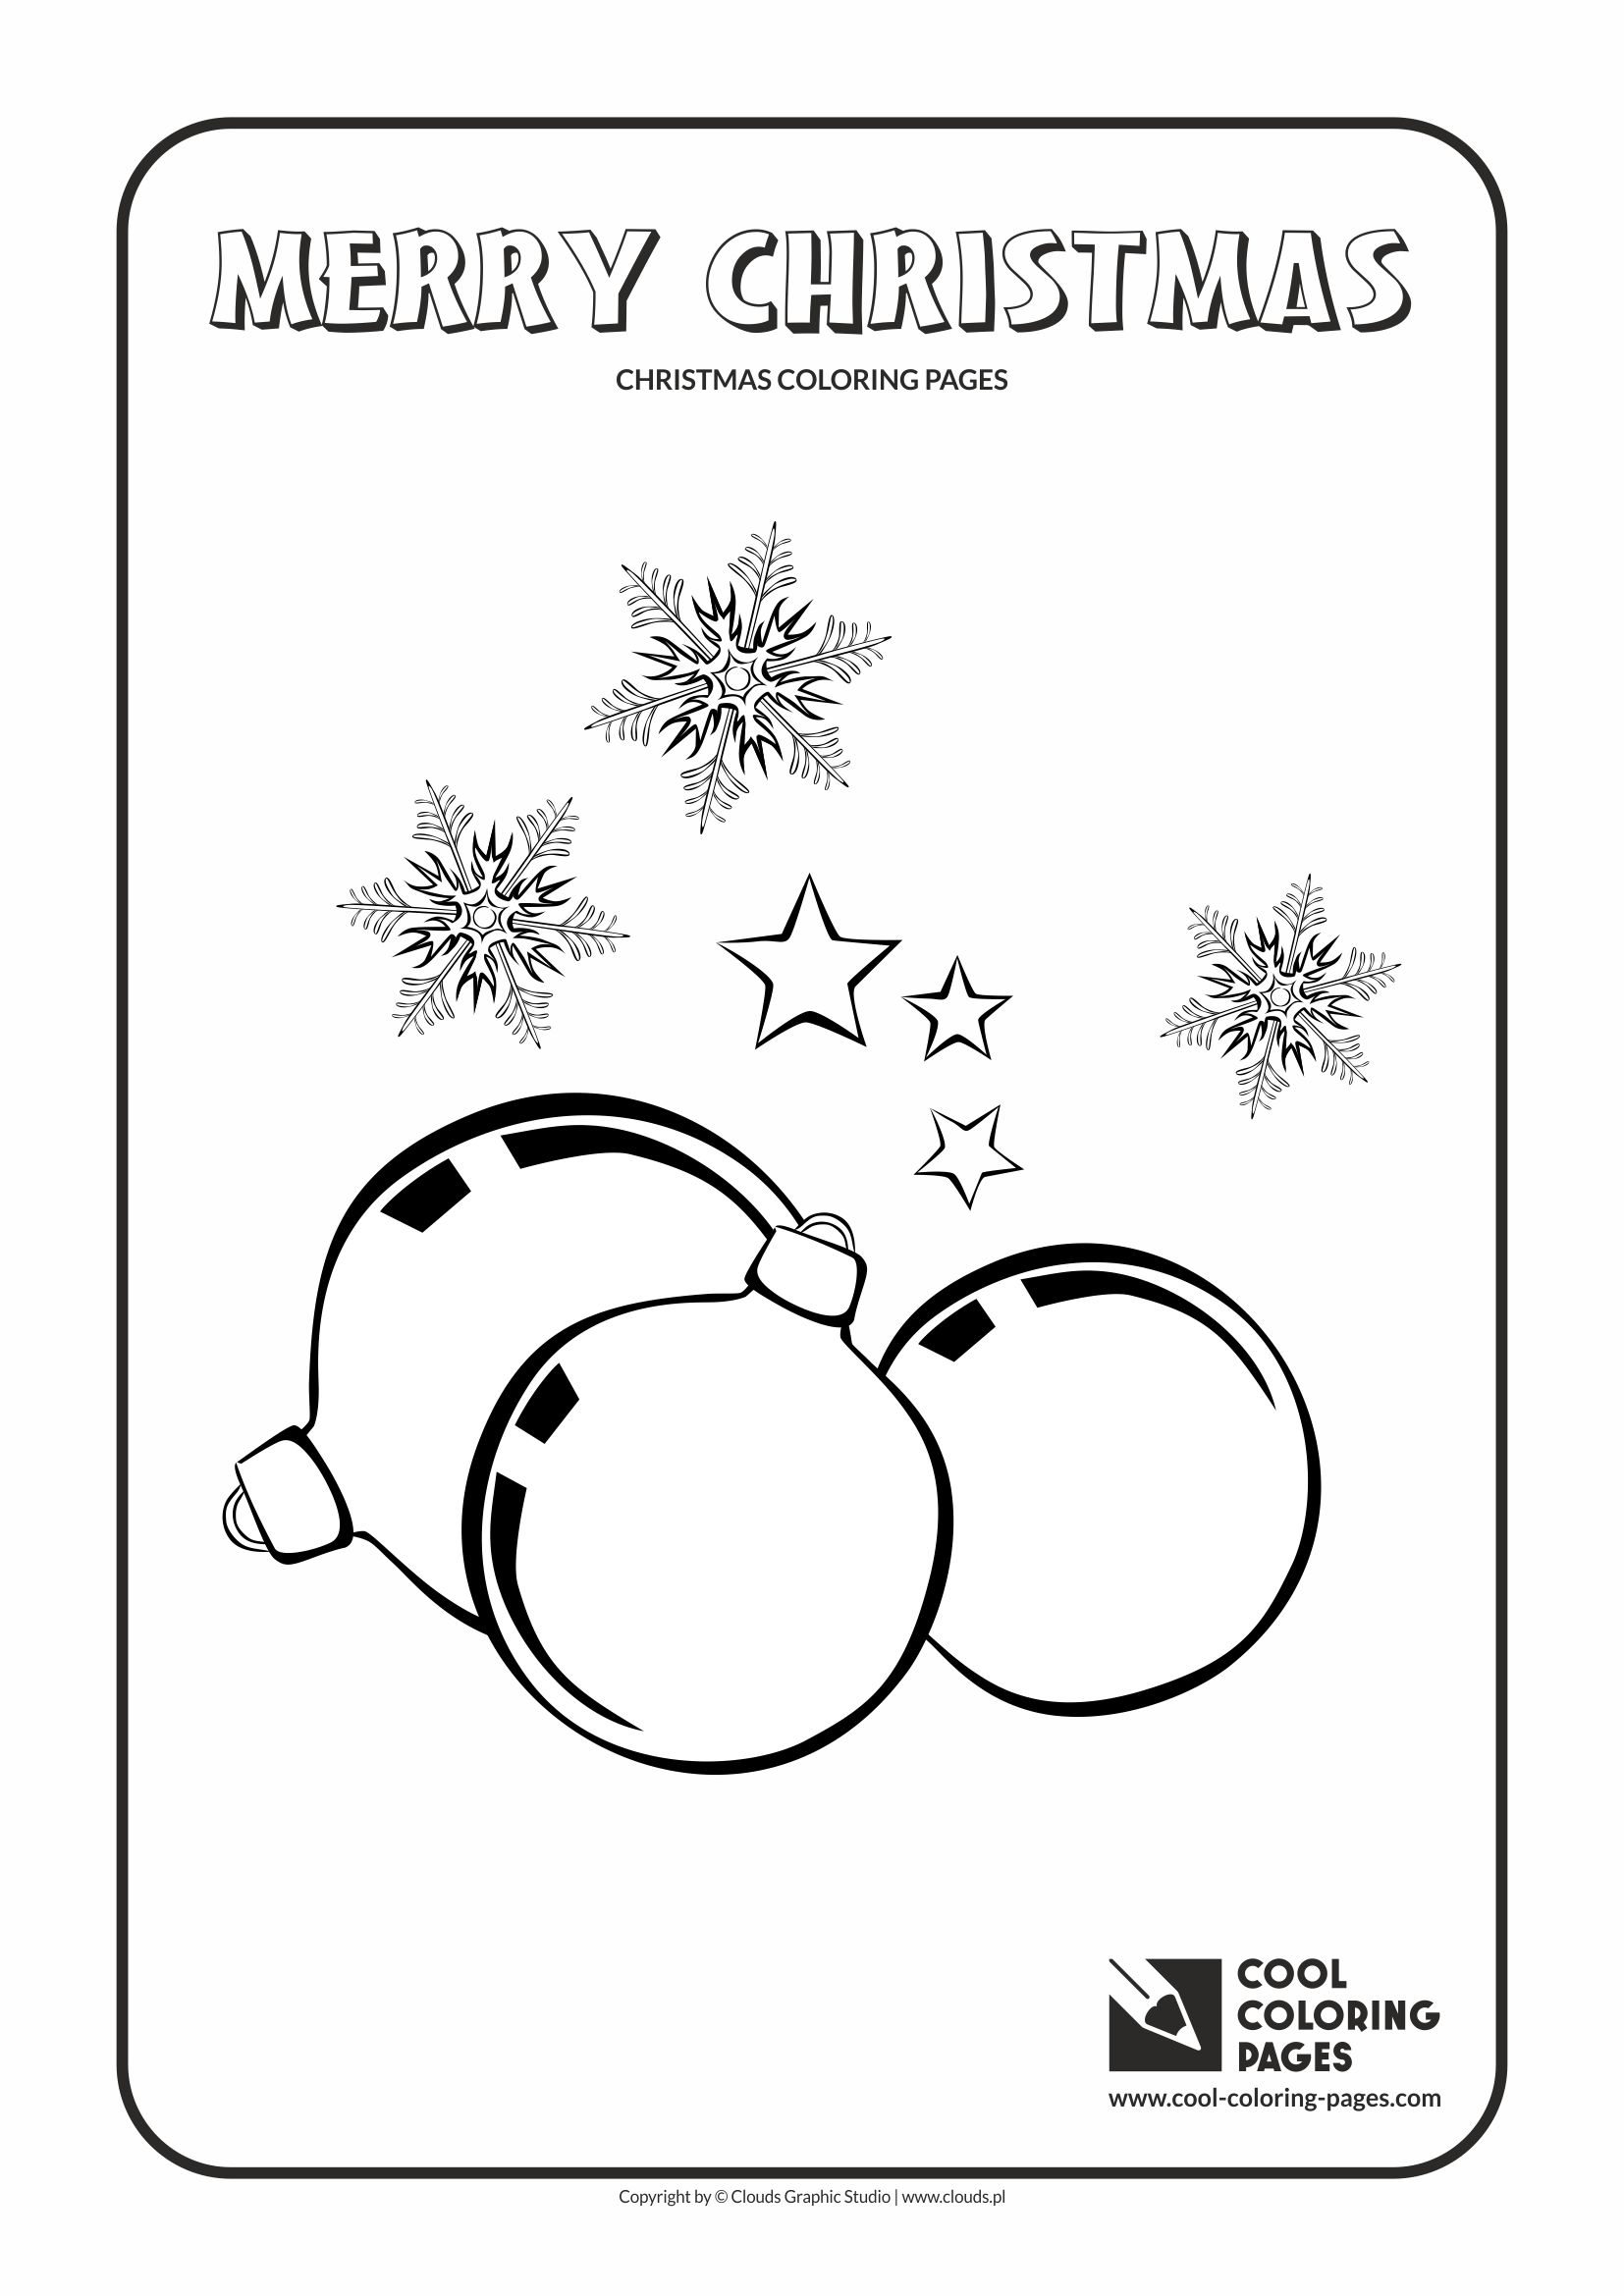 Cool Coloring Pages - Holidays / Christmas glass balls no 1 / Coloring page with Christmas glass balls no 1